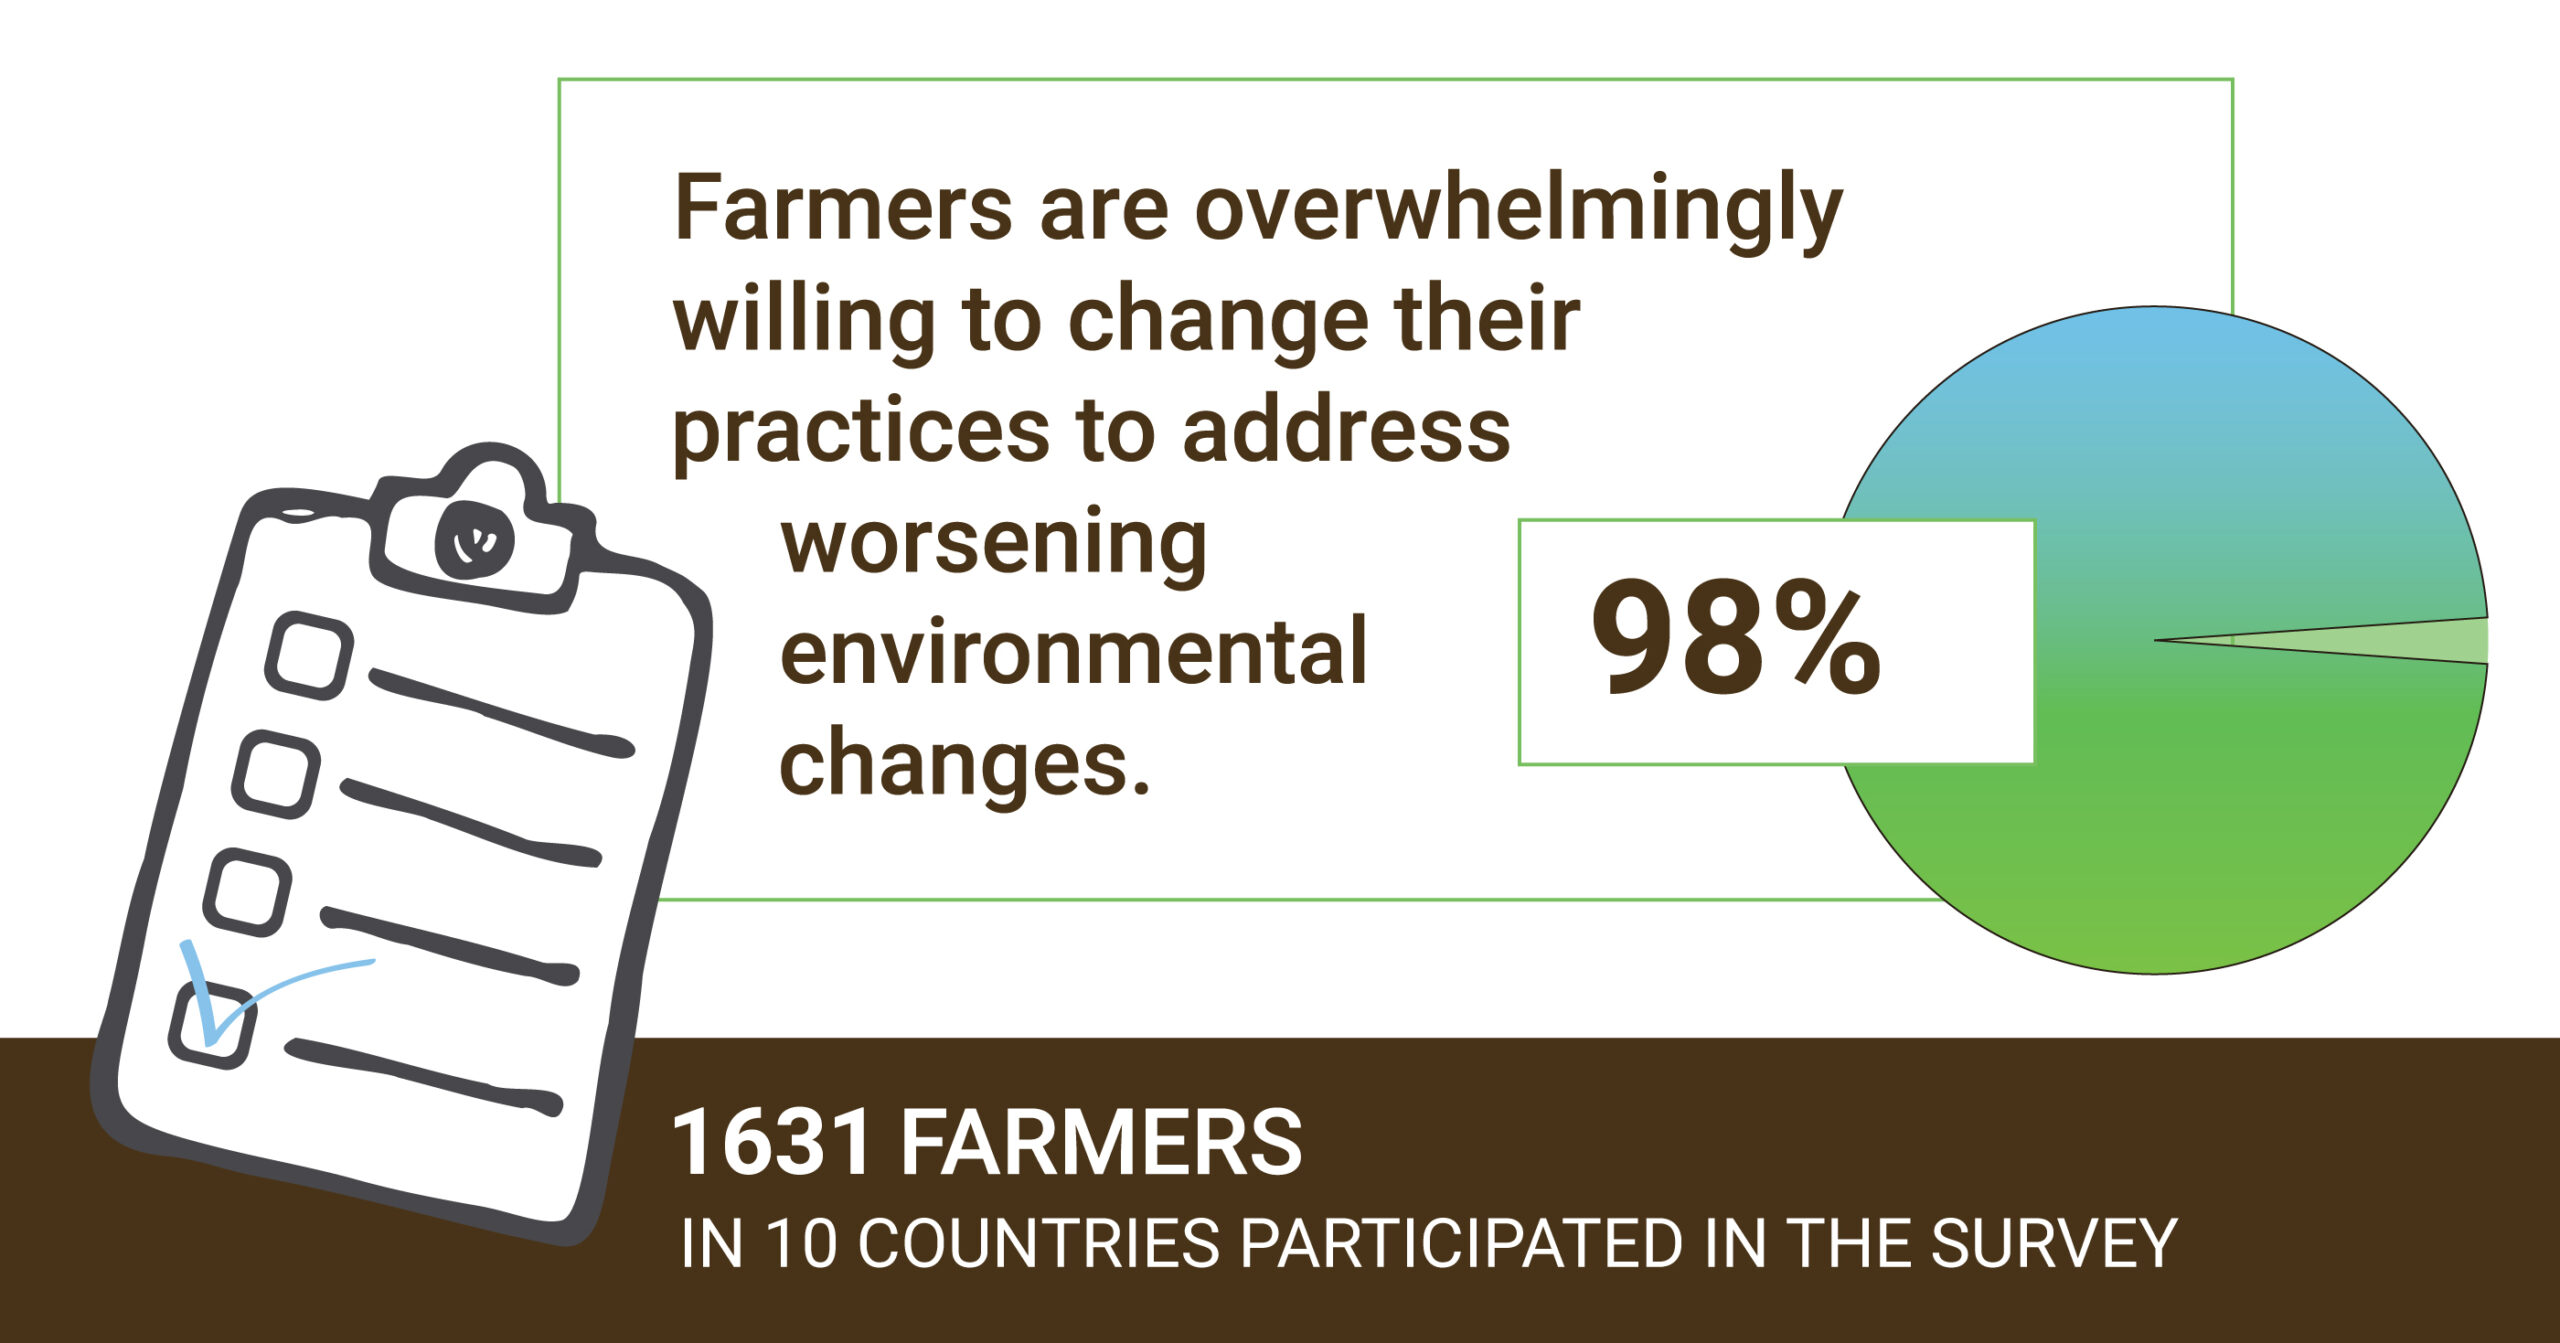 We spoke to smallholder farmers about how to mitigate climate change. They want to help.